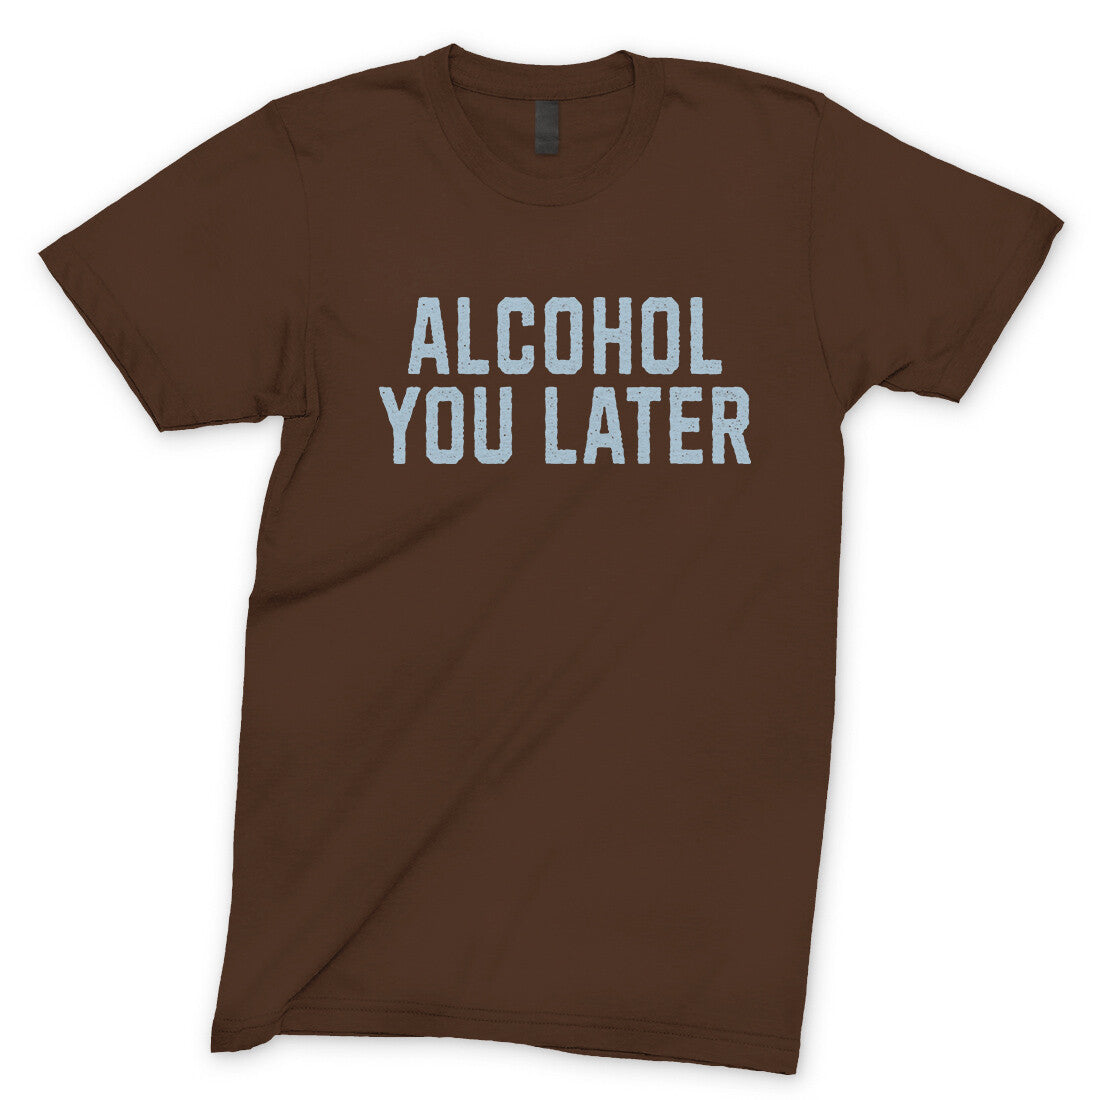 Alcohol You Later in Dark Chocolate Color